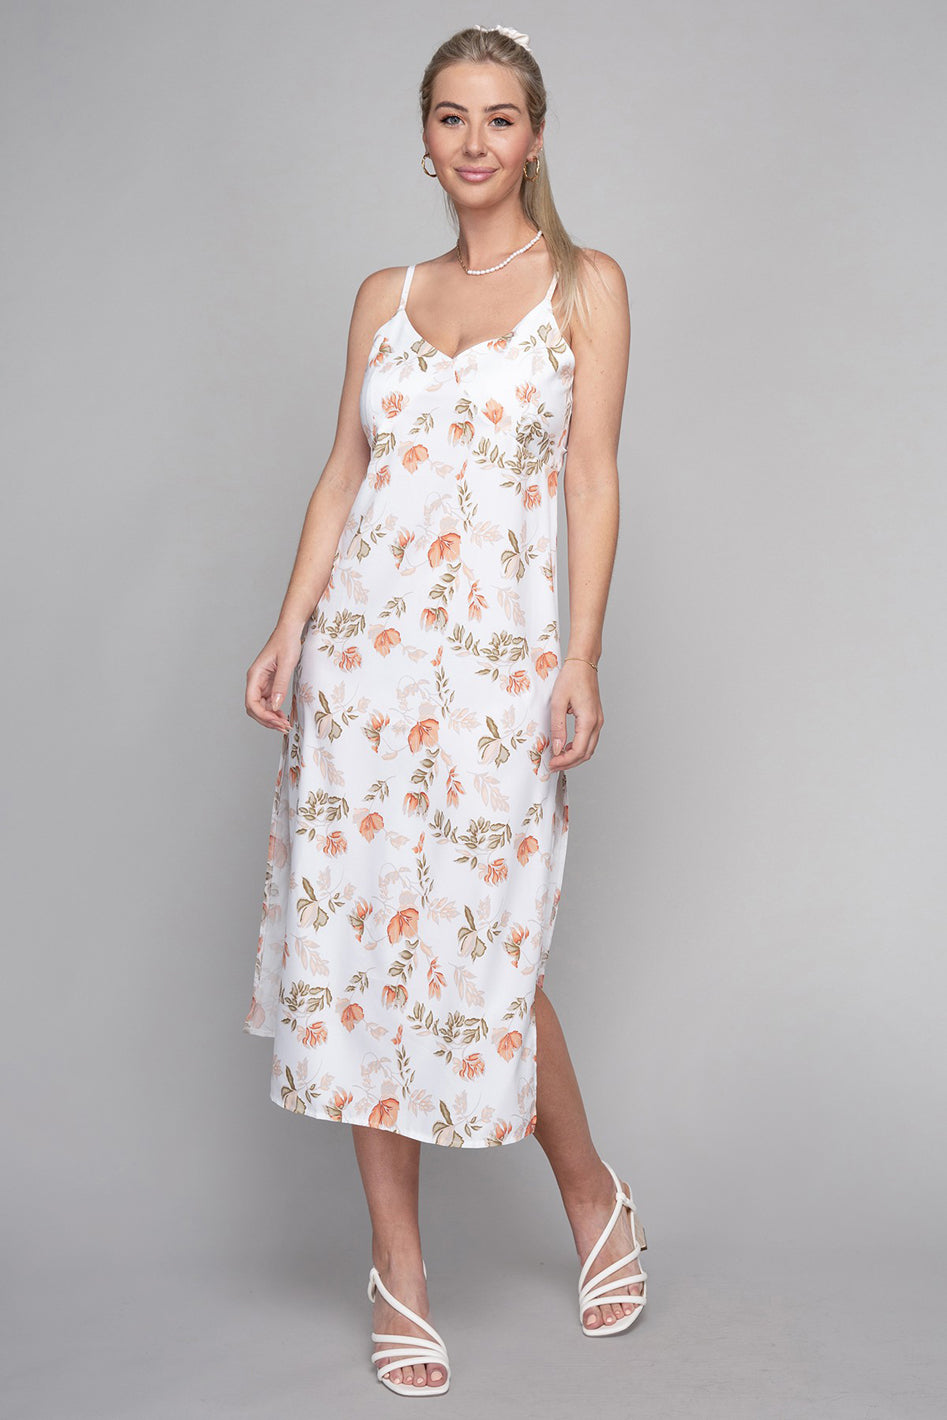 Frenchy Tied Backless Floral Cami Dress - Azoroh